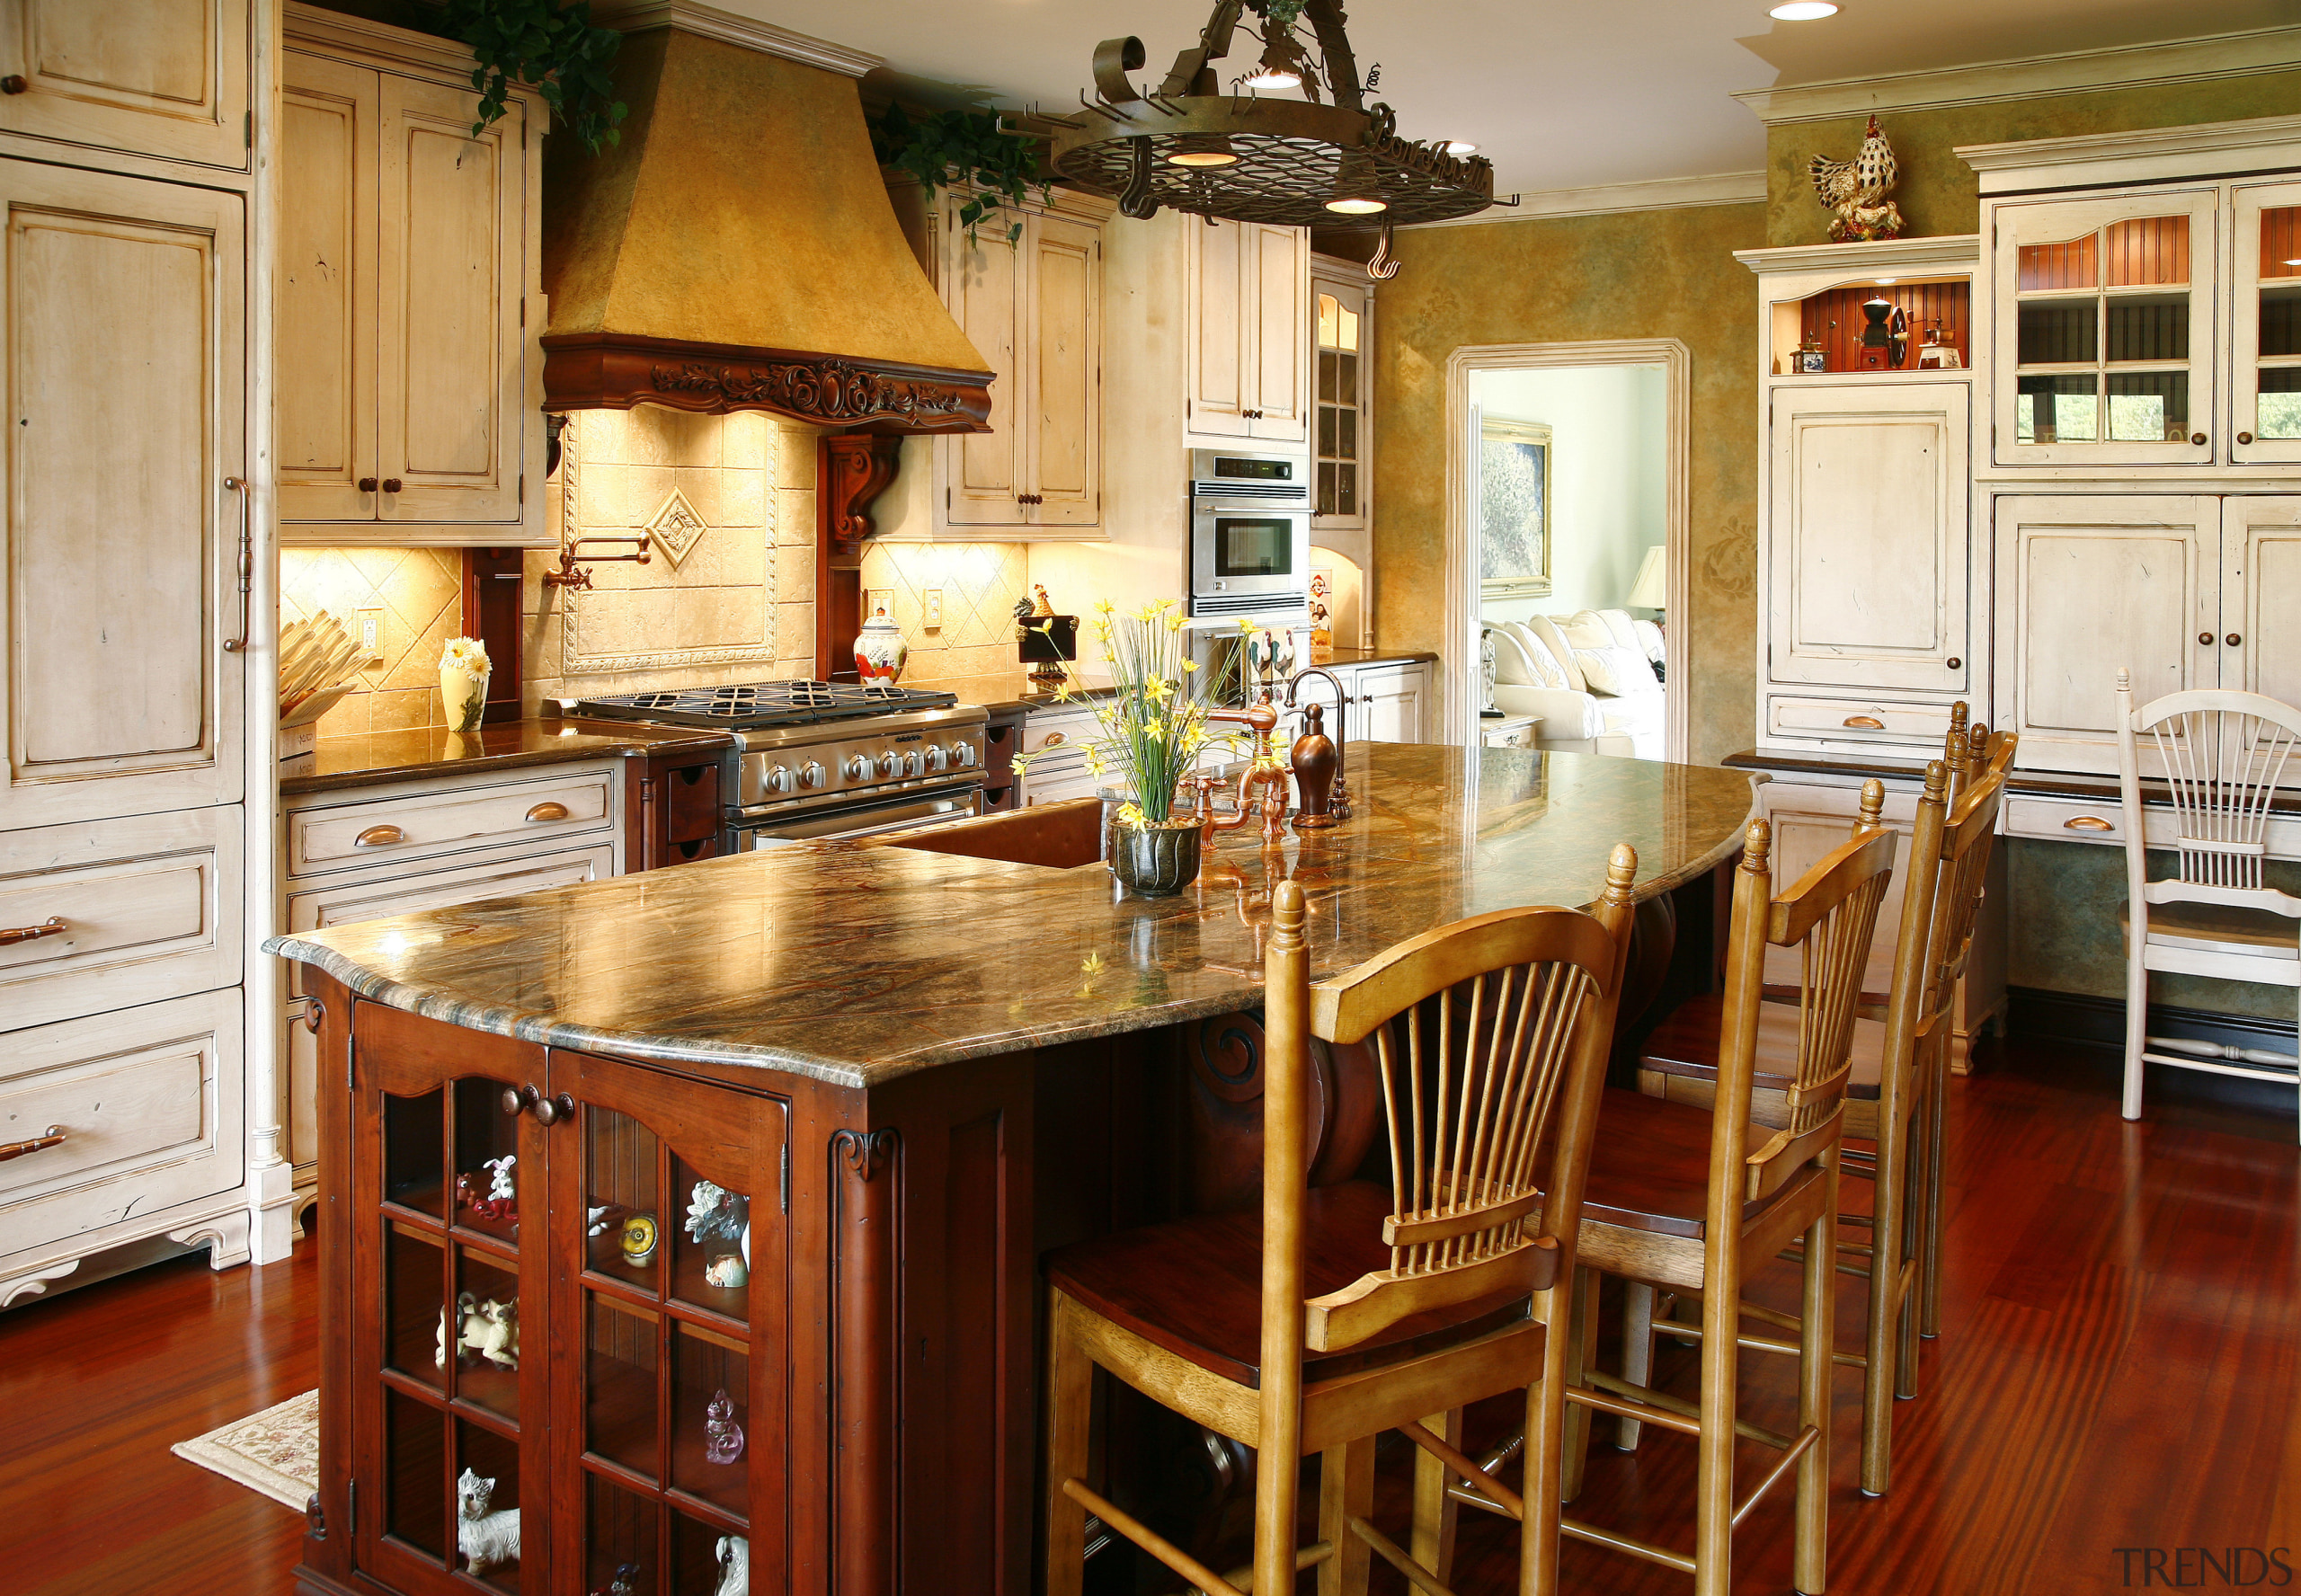 The Island's select alder cabinetry is paired with cabinetry, countertop, cuisine classique, dining room, furniture, hardwood, interior design, kitchen, room, table, wood, red, orange